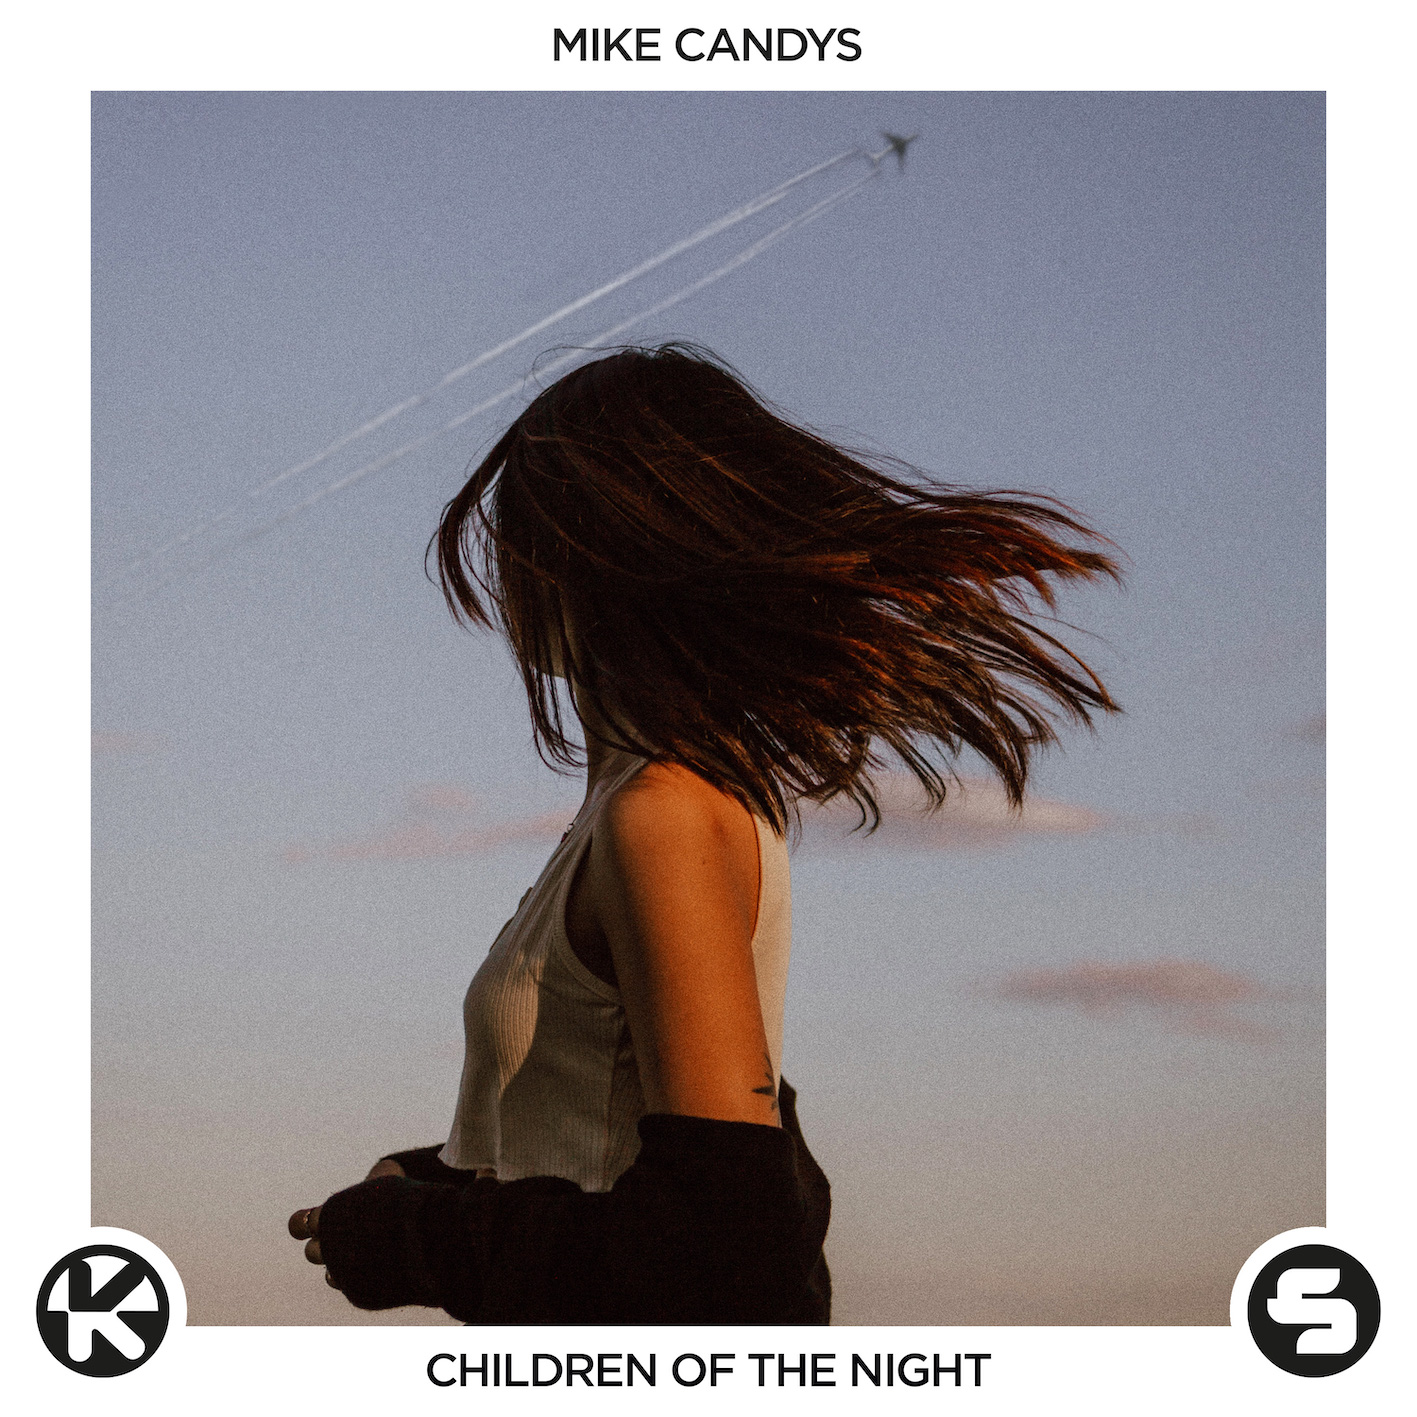 MIKE CANDYS – CHILDREN OF THE NIGHT